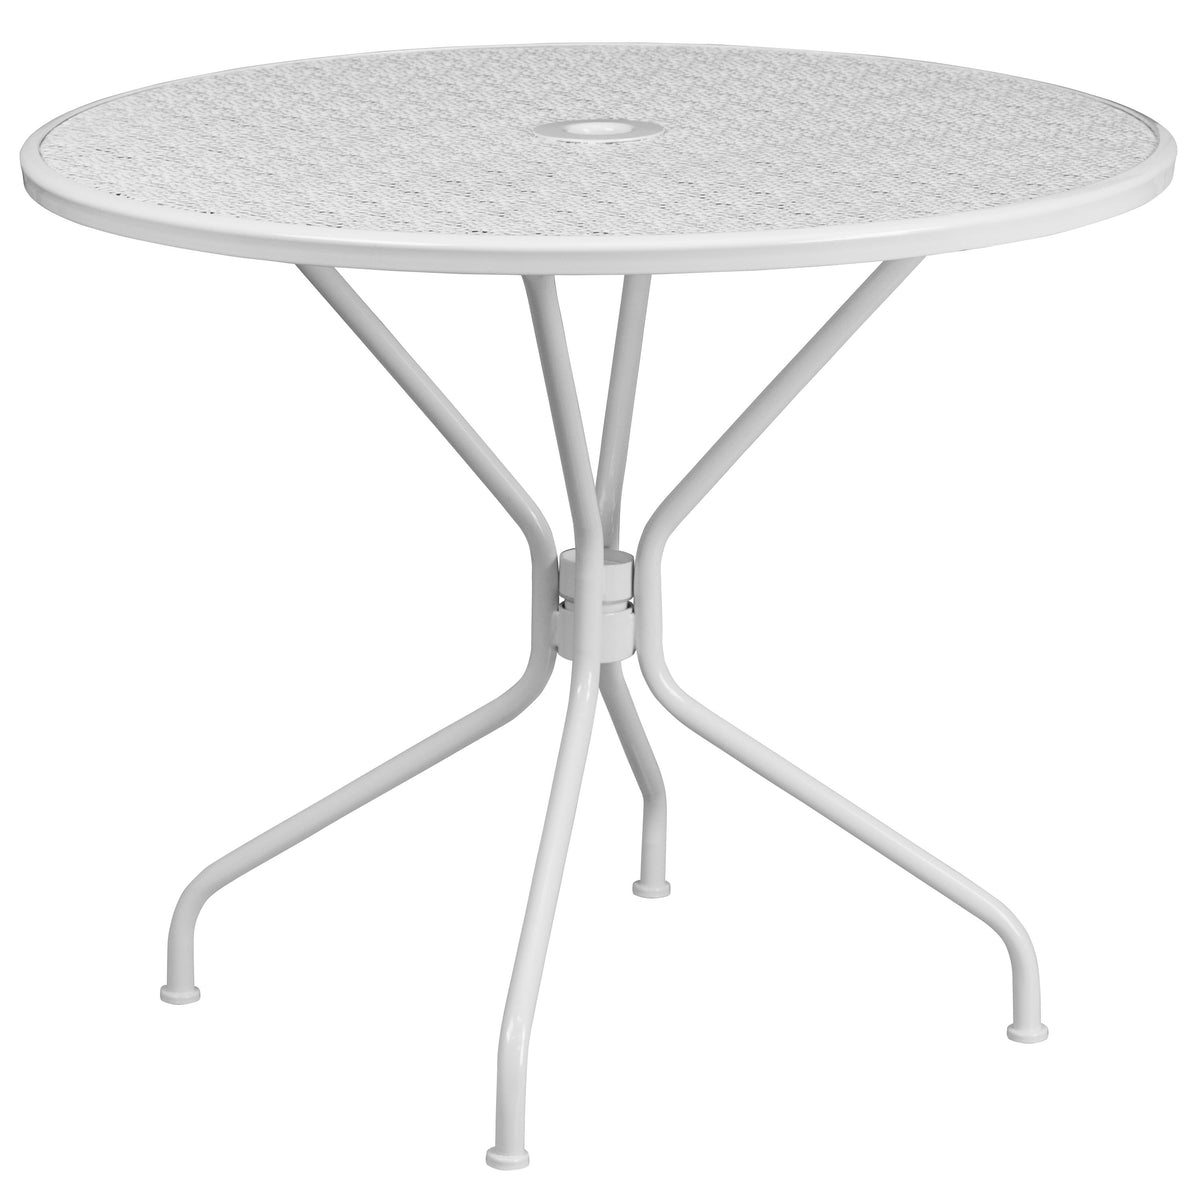 White |#| 35.25inch Round White Indoor-Outdoor Steel Patio Table Set w/ 4 Square Back Chairs